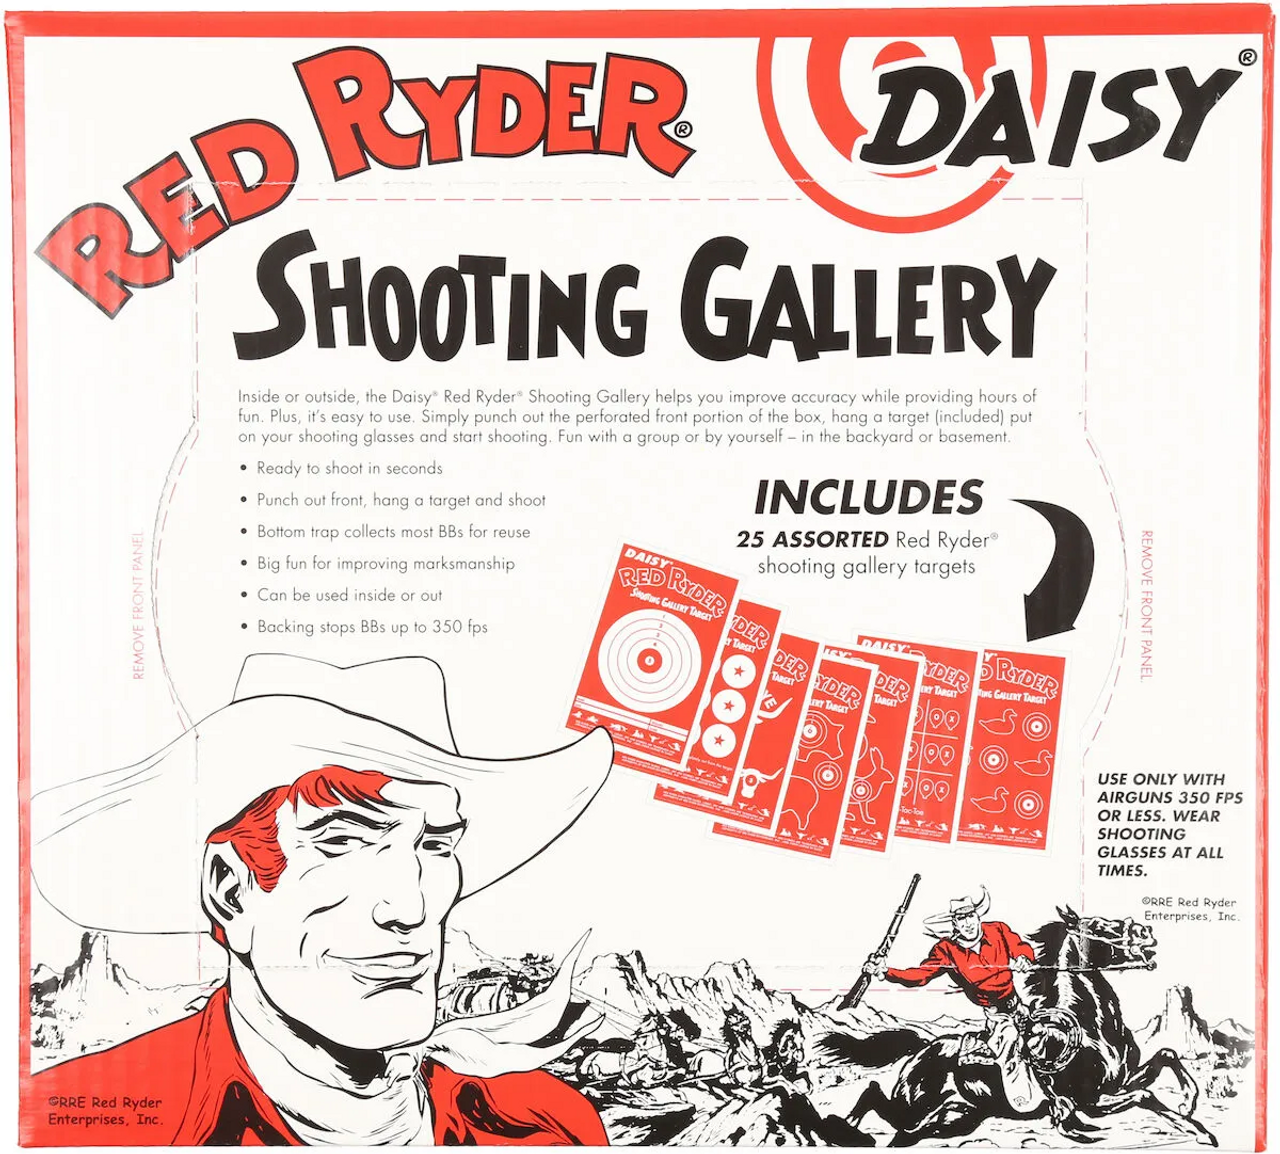 Daisy Red Ryder Shooting Gallery